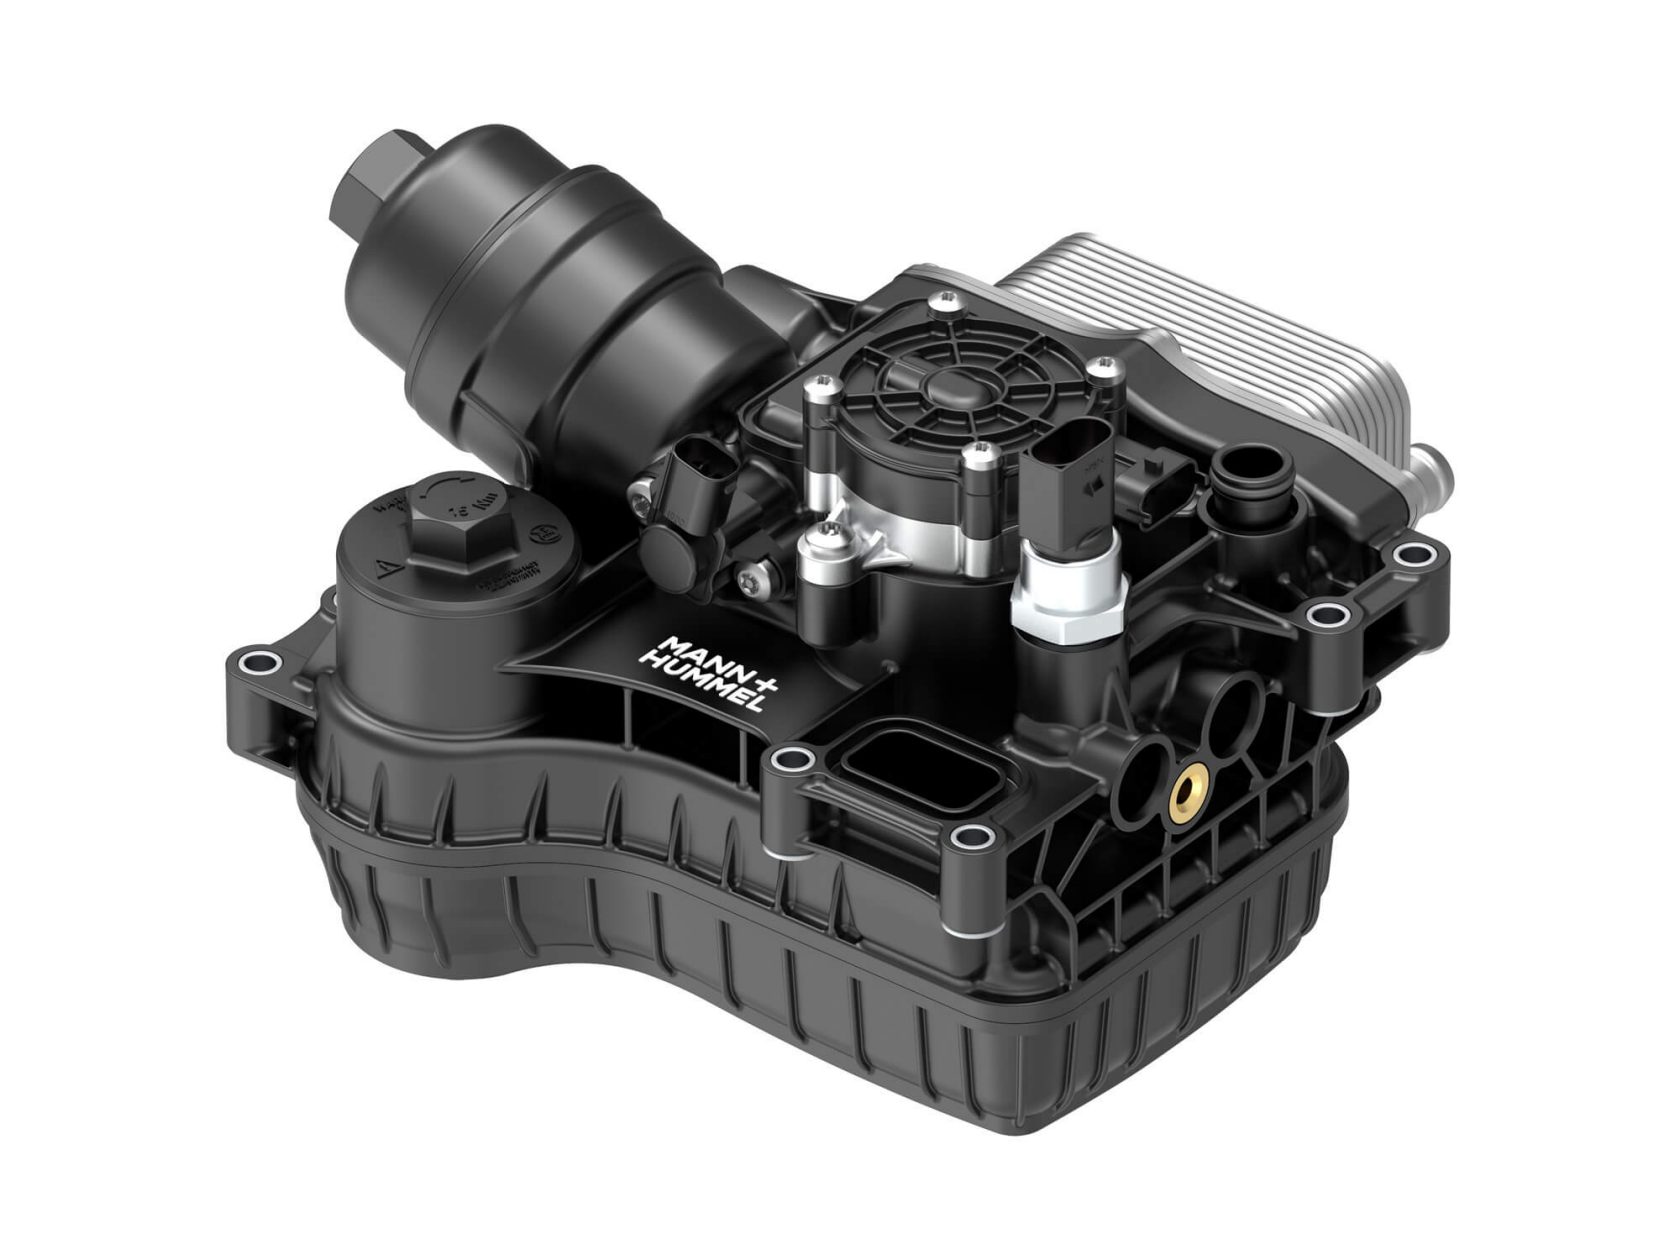 Oil filter system for e-axles and hybrid transmissions